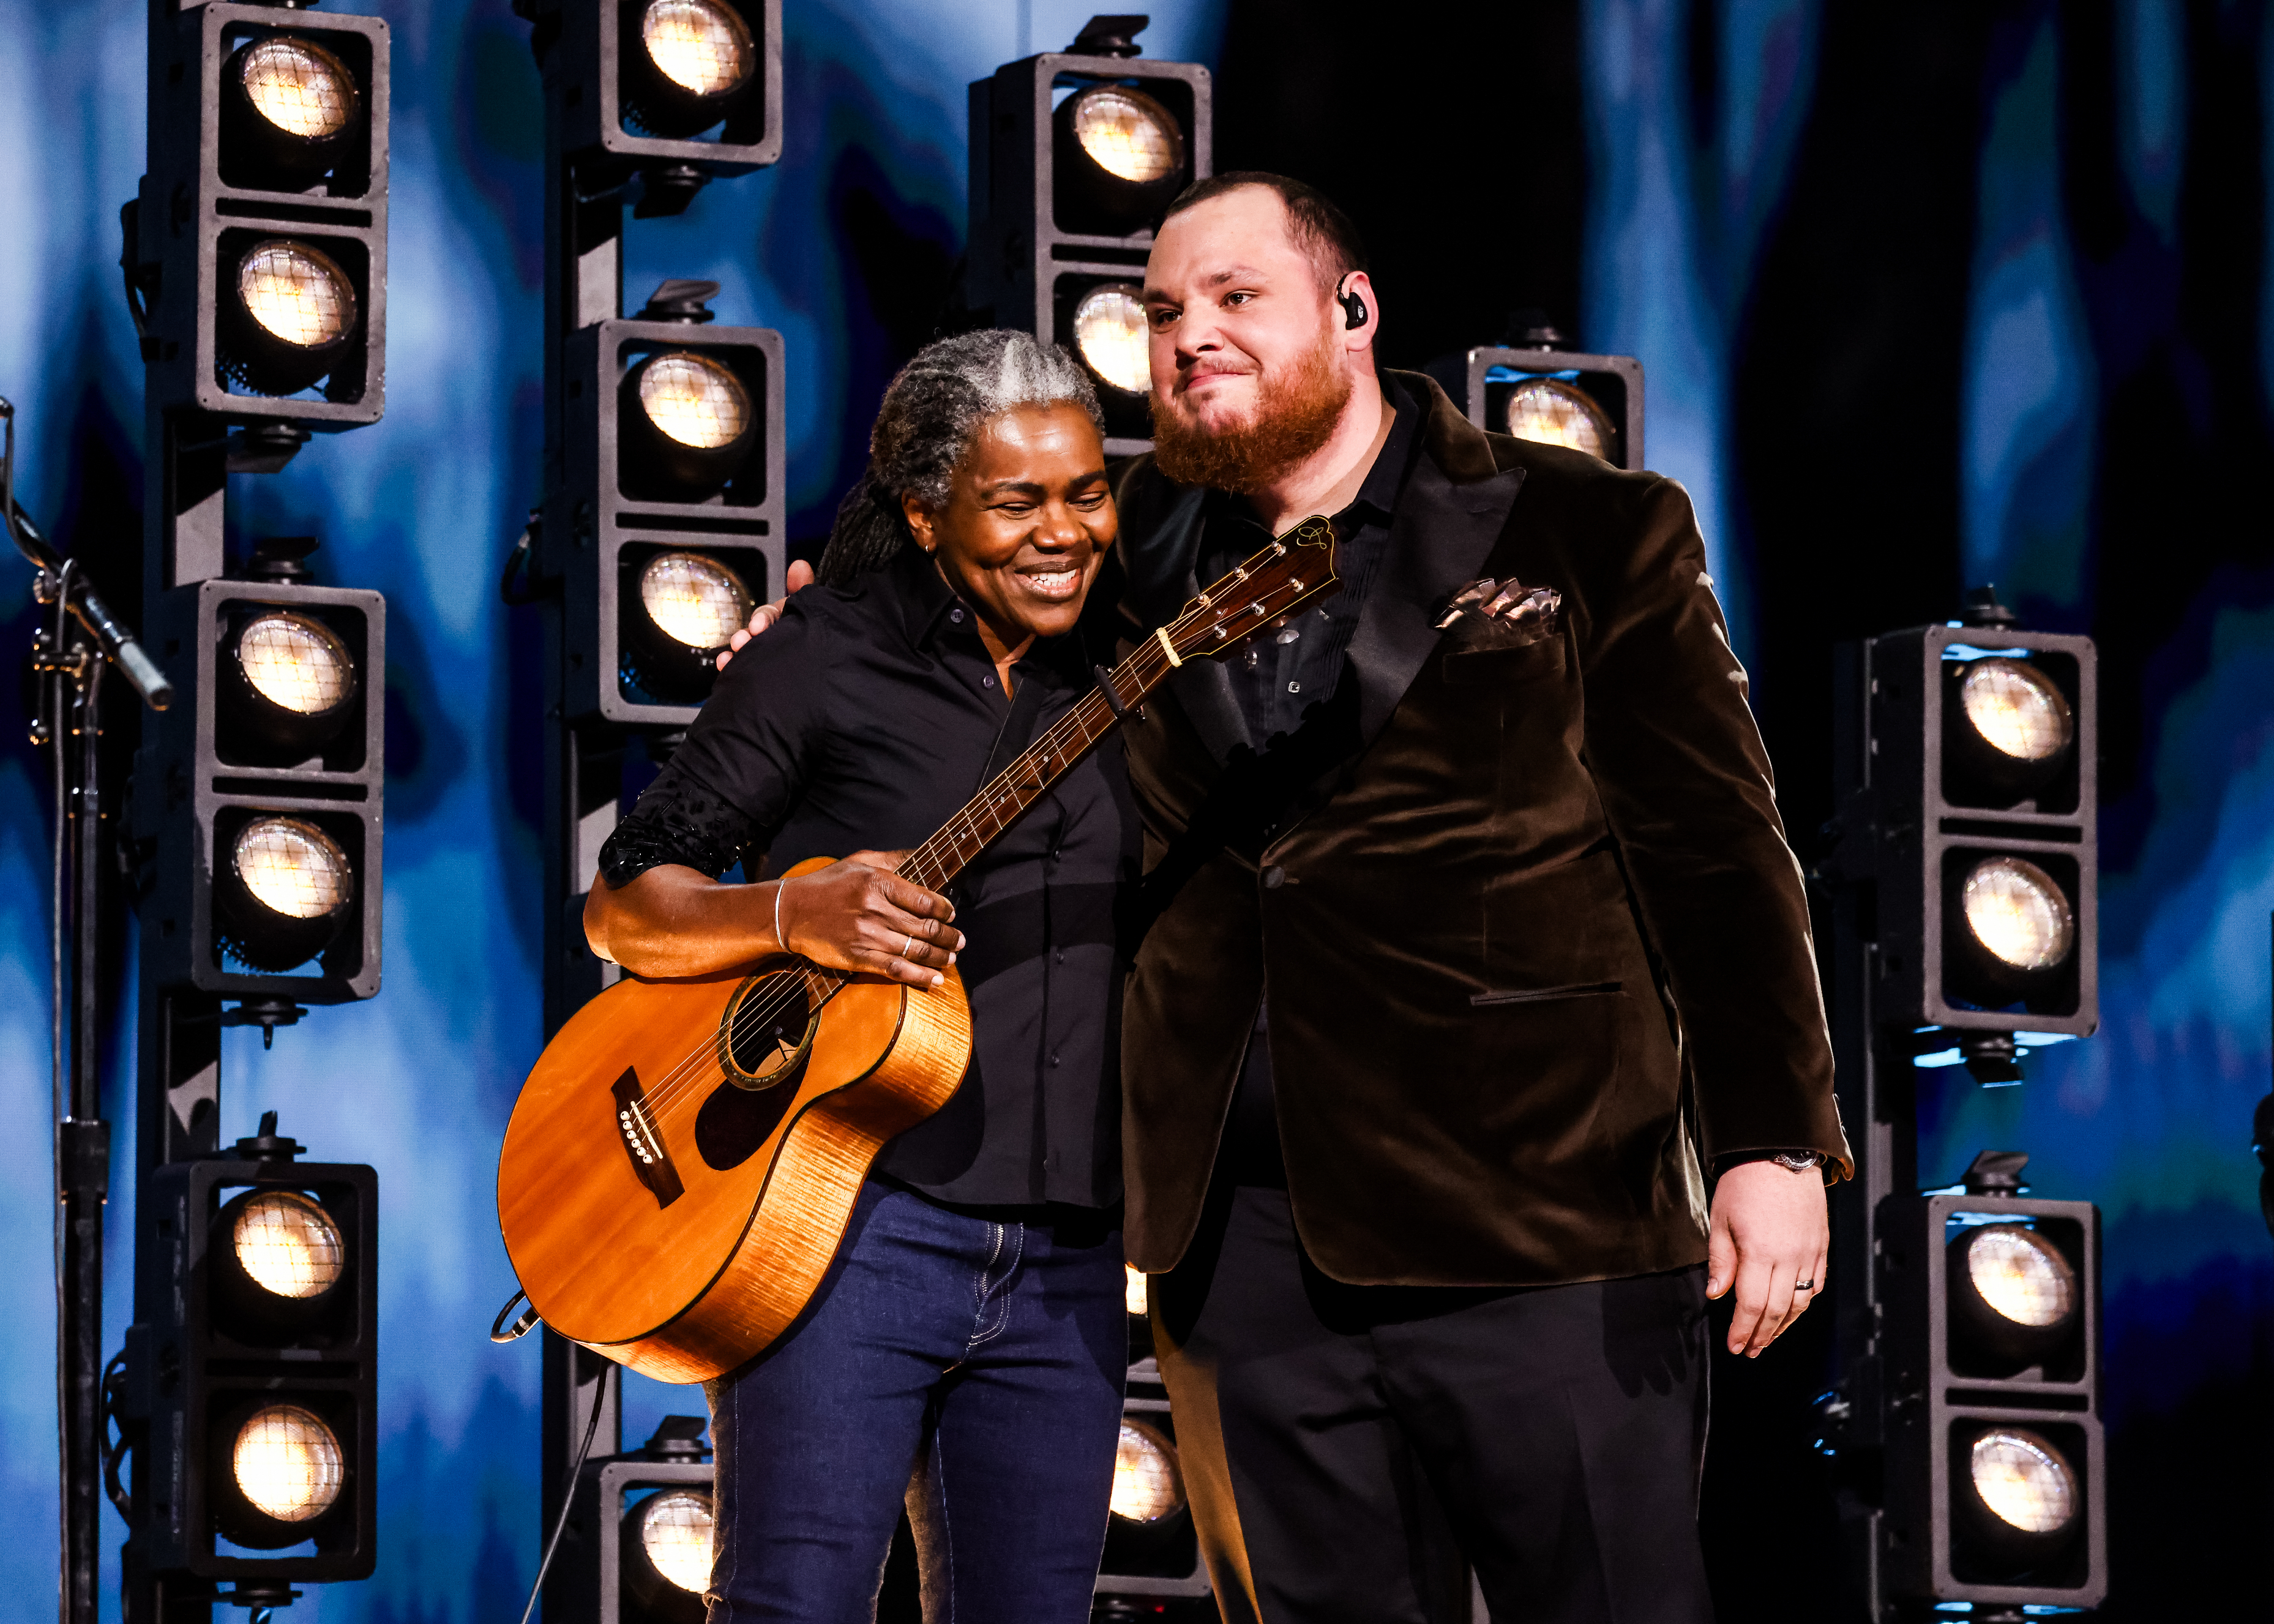 Tracy Chapman and Luke Combs hugging onstage